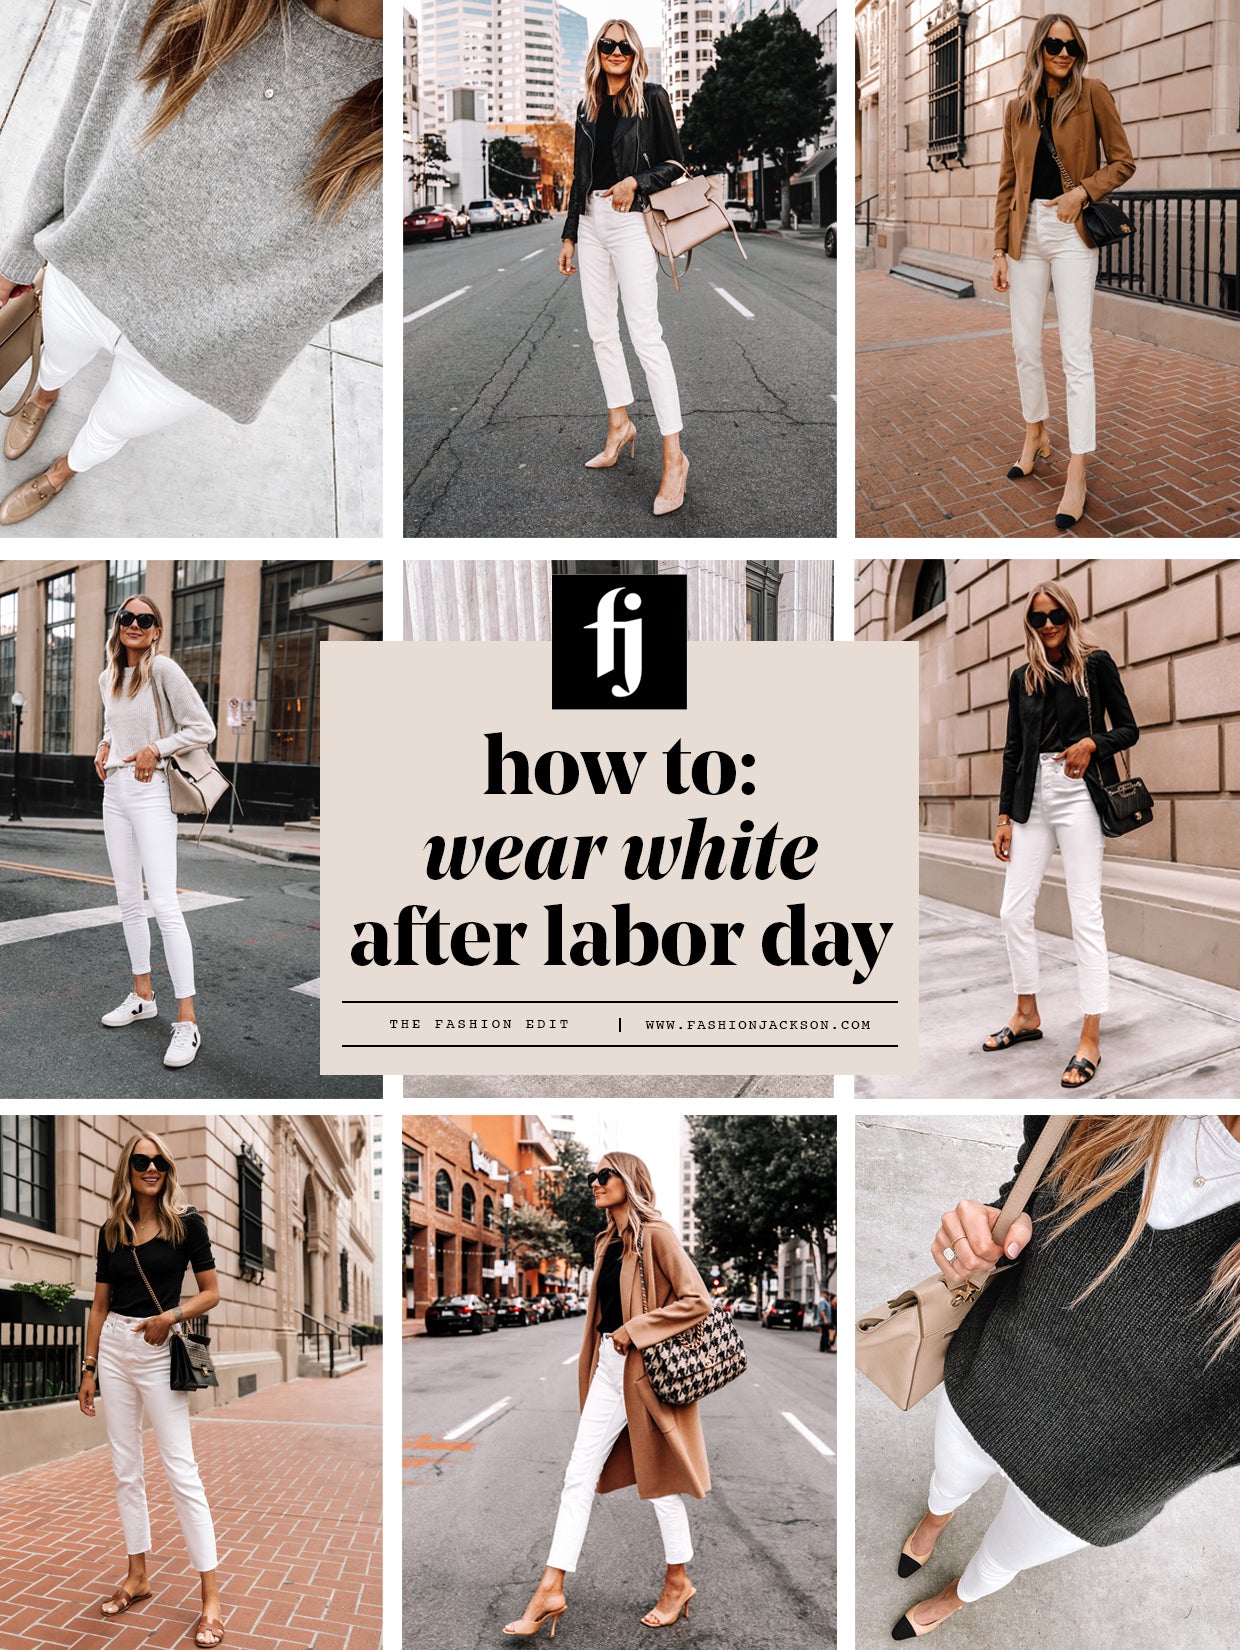 Can You Wear White Pants After Labor Day?